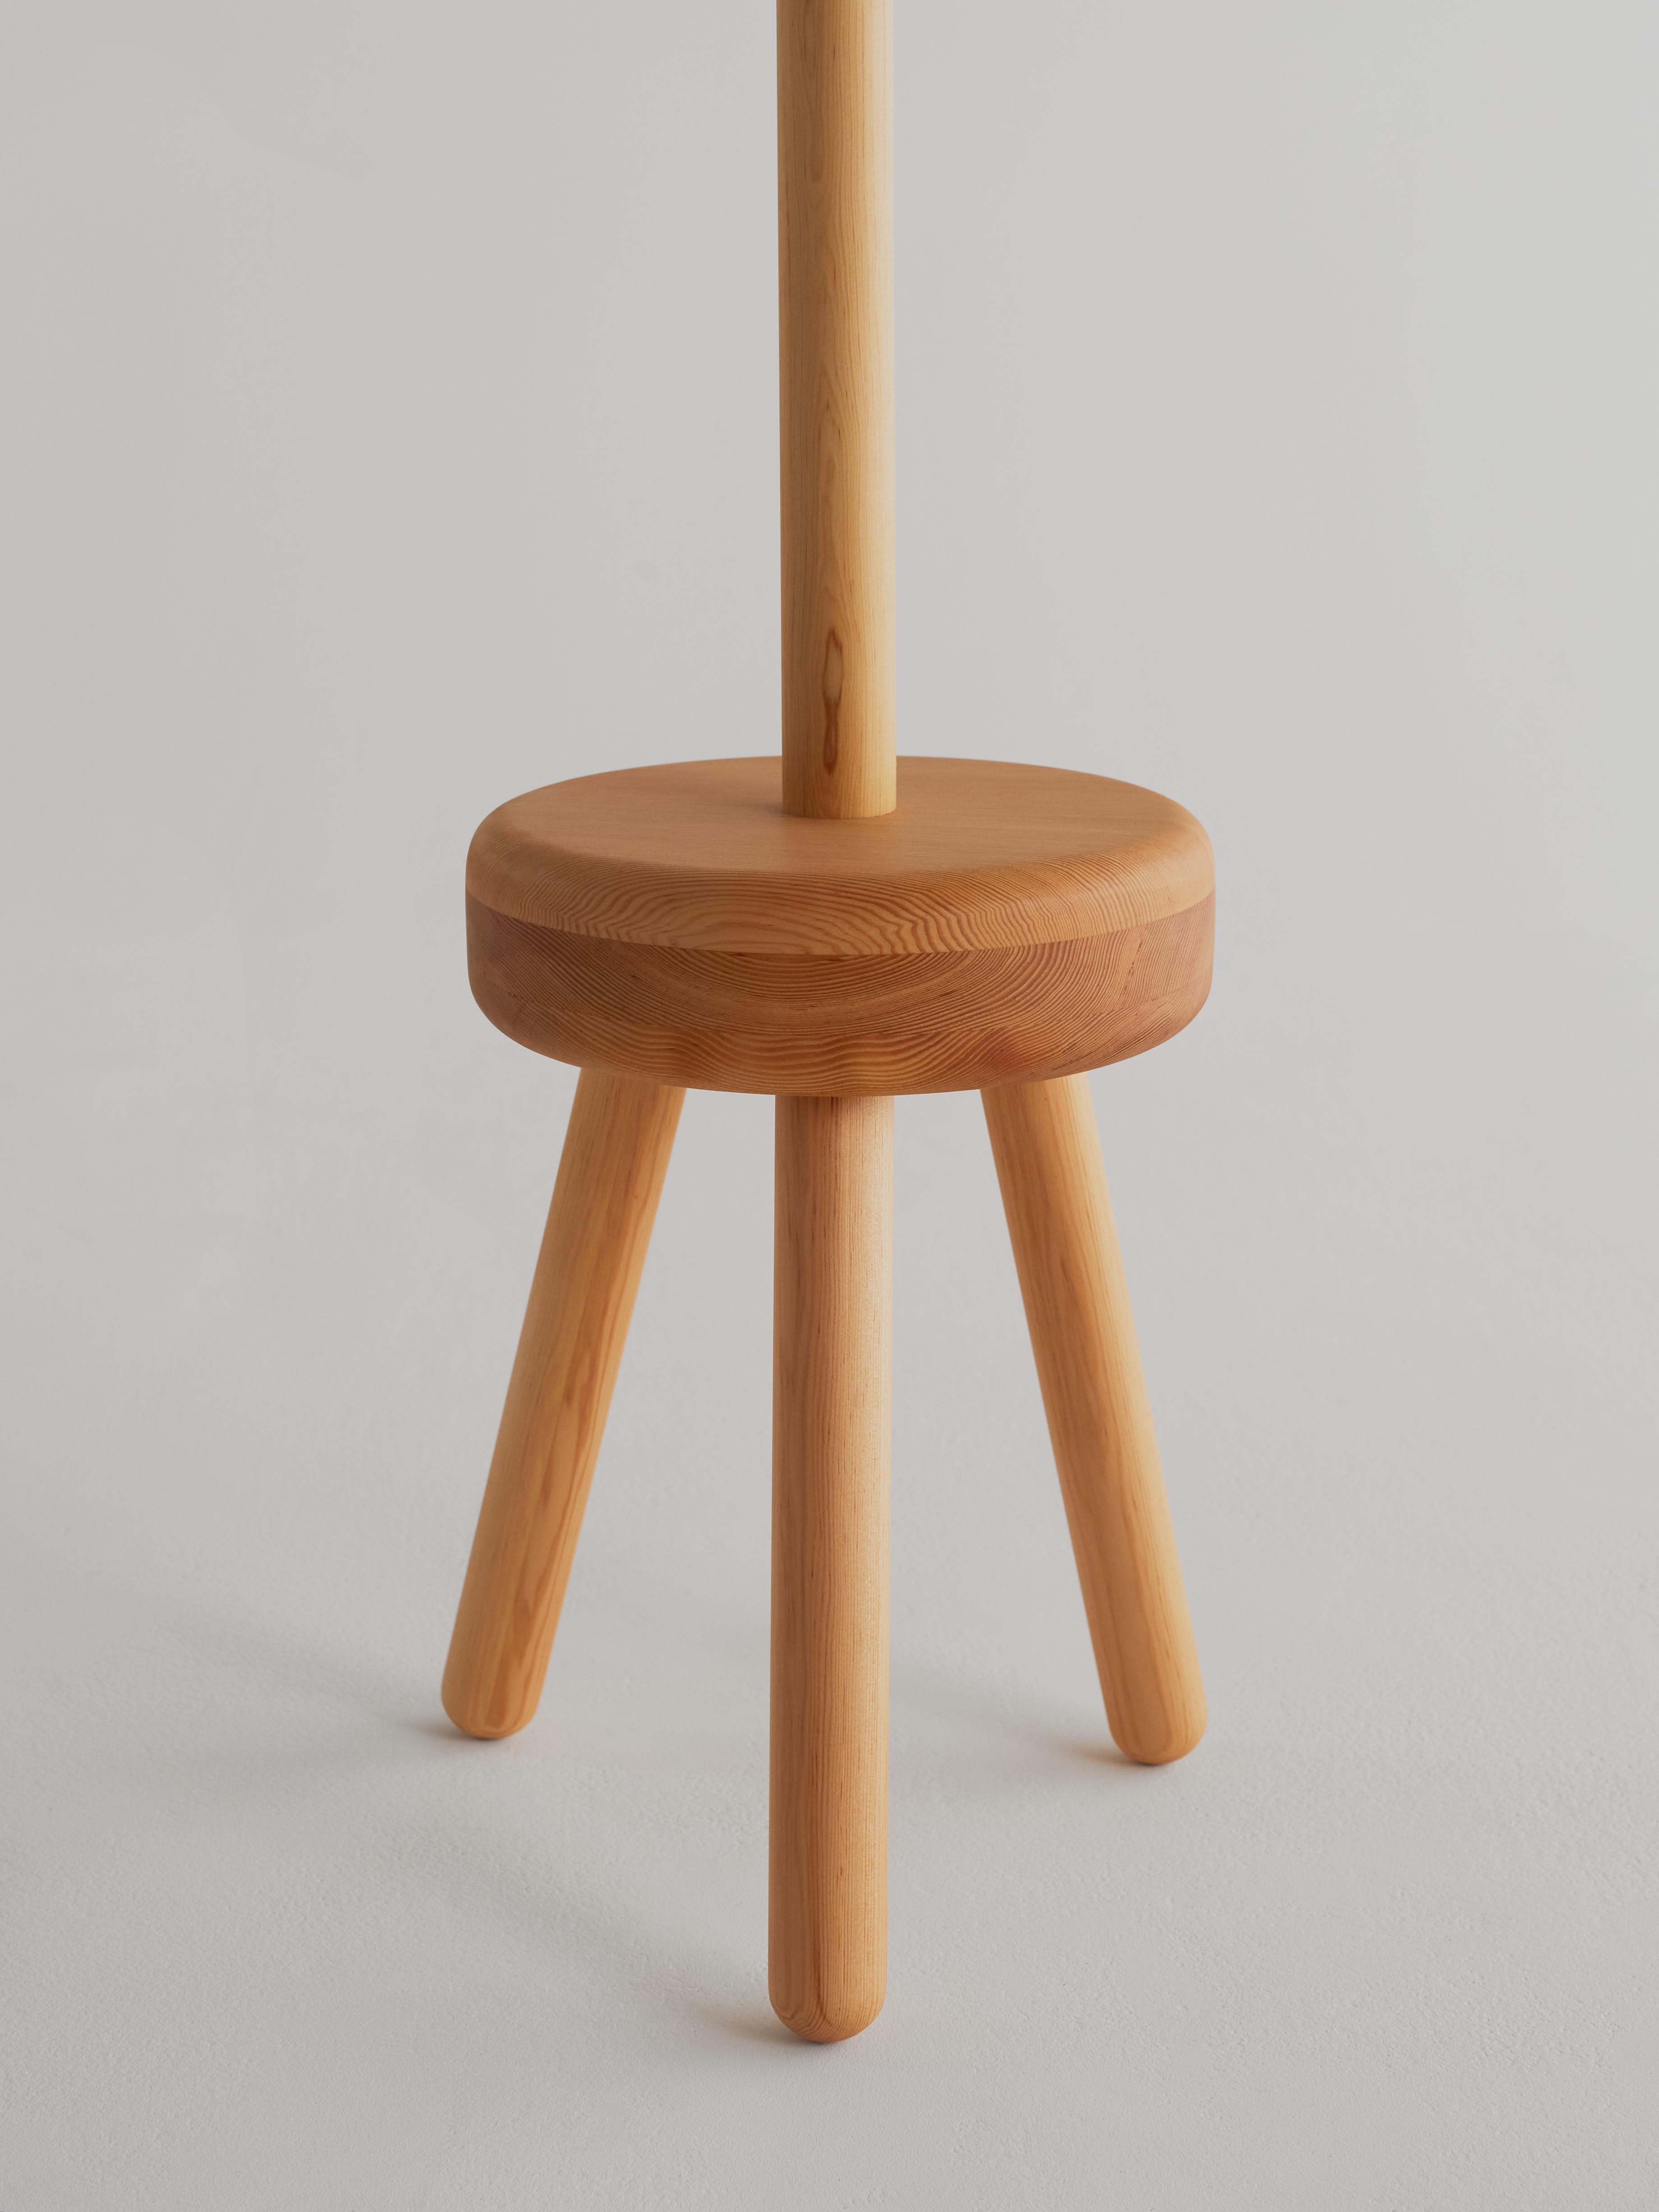 Peg coat rack by Campagna, shown in Douglas Fir. 

Drawing inspiration from Shaker sewing and side tables, this solid wood, hand-made coat rack adds a sense of playful delight to any entryway. Both minimal and whimsical, the Peg Coat Rack utilizes